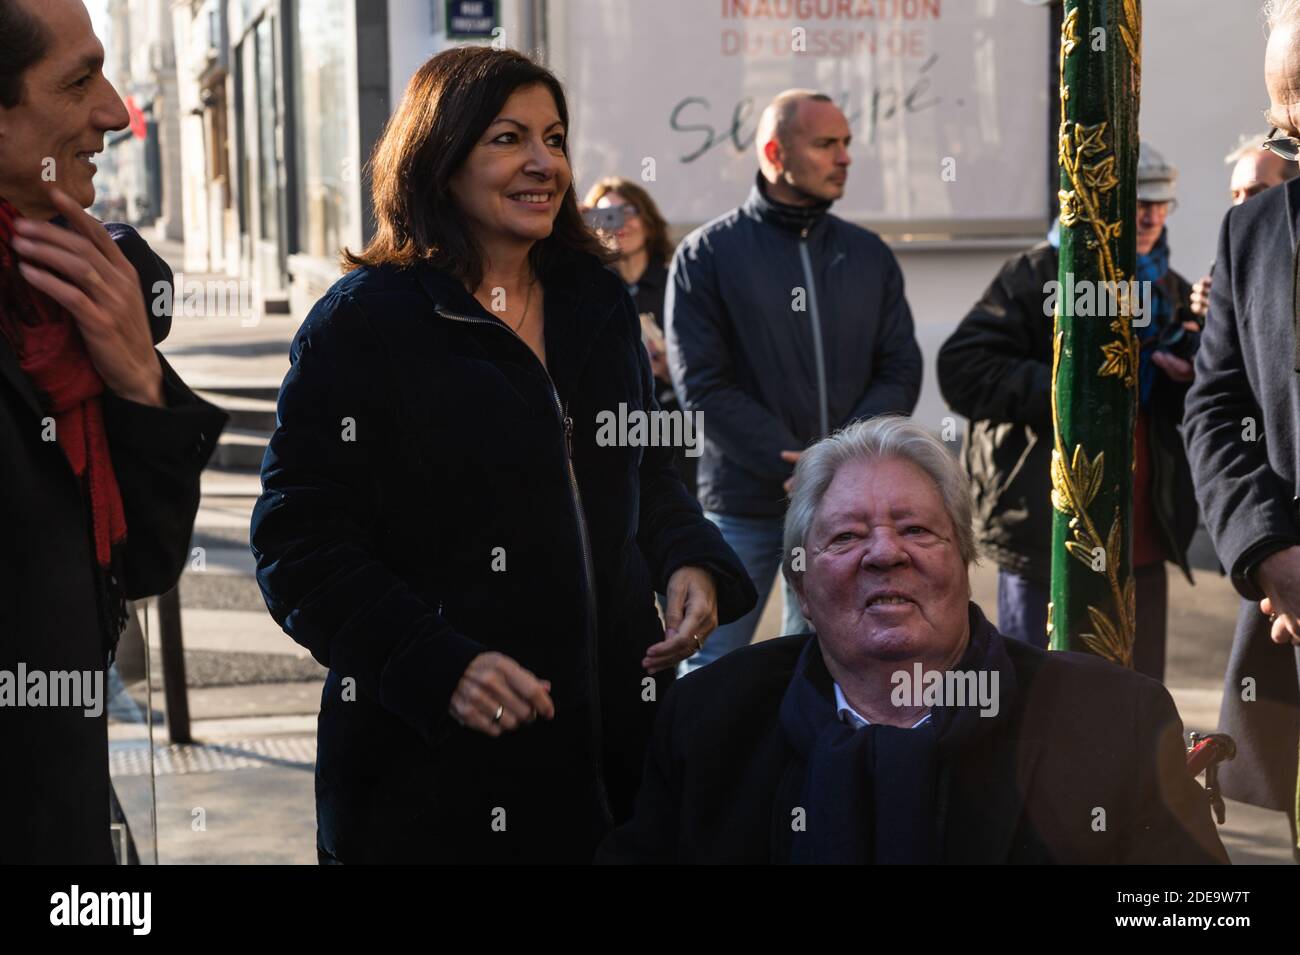 Anne Hidalgo, Mayor of Paris, unveils a wall fresco from a artwork of artist Jean-Jacques Sempe in presence of the artist, Jacques Aidenbaum, Mayor of the 3rd District, Jean Jacques Decaux, chairman of JC Decaux, François Morel actor and director and Jean Marie Havan artist who painted the wall, at the crossing of Boulevard des Filles du Calvaire and Rue Froissard, 3rd District of Paris, France, Febuary 16th, 2019. Photo by Daniel Derajinski/ABACAPRESS.COM Stock Photo